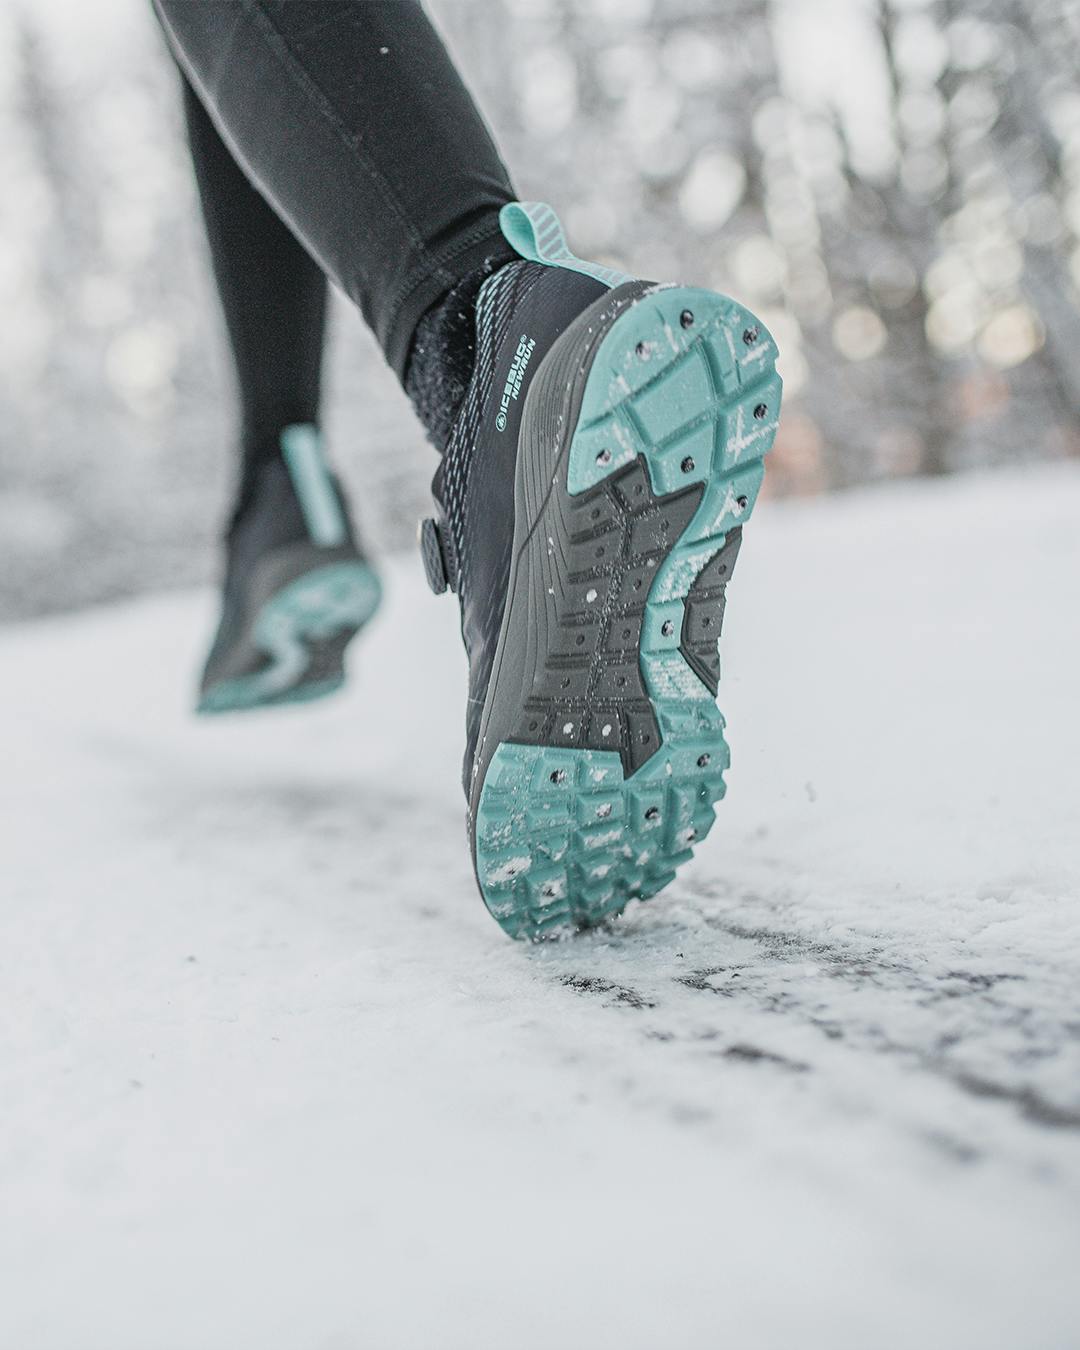 A person running on an icy road wearing winter running shoes from Icebug